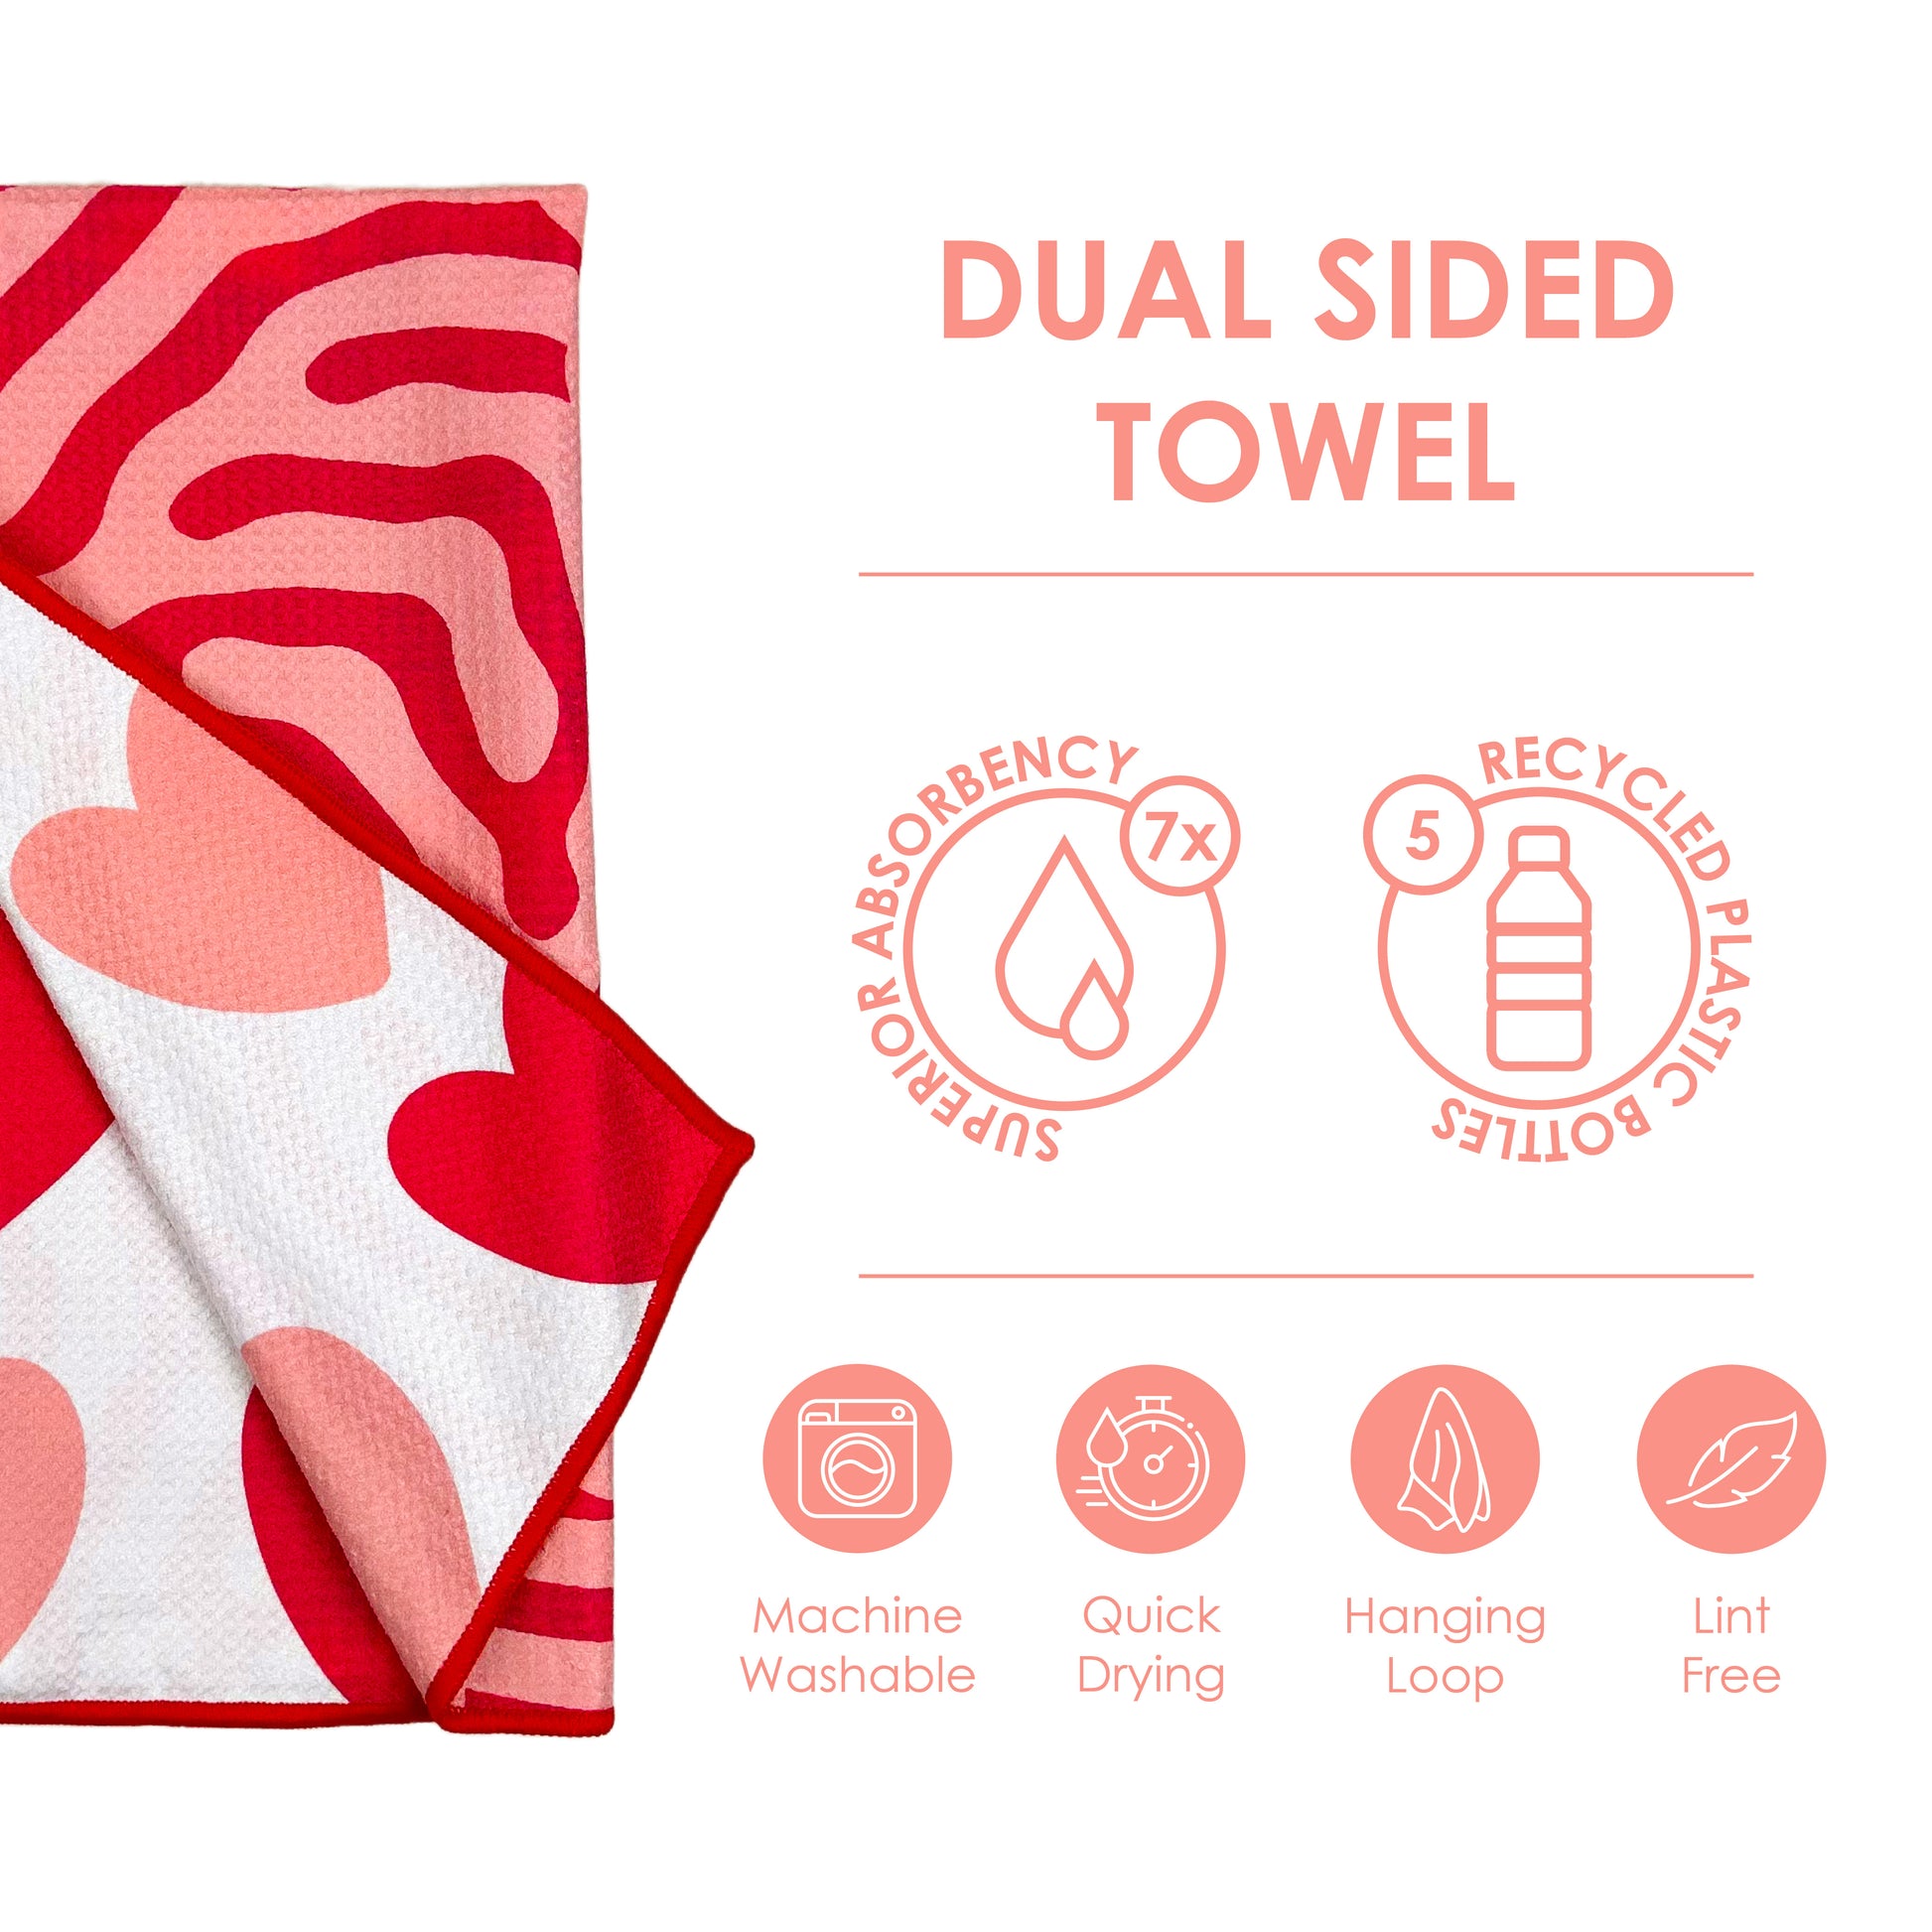 The 5 Best Hand Towels